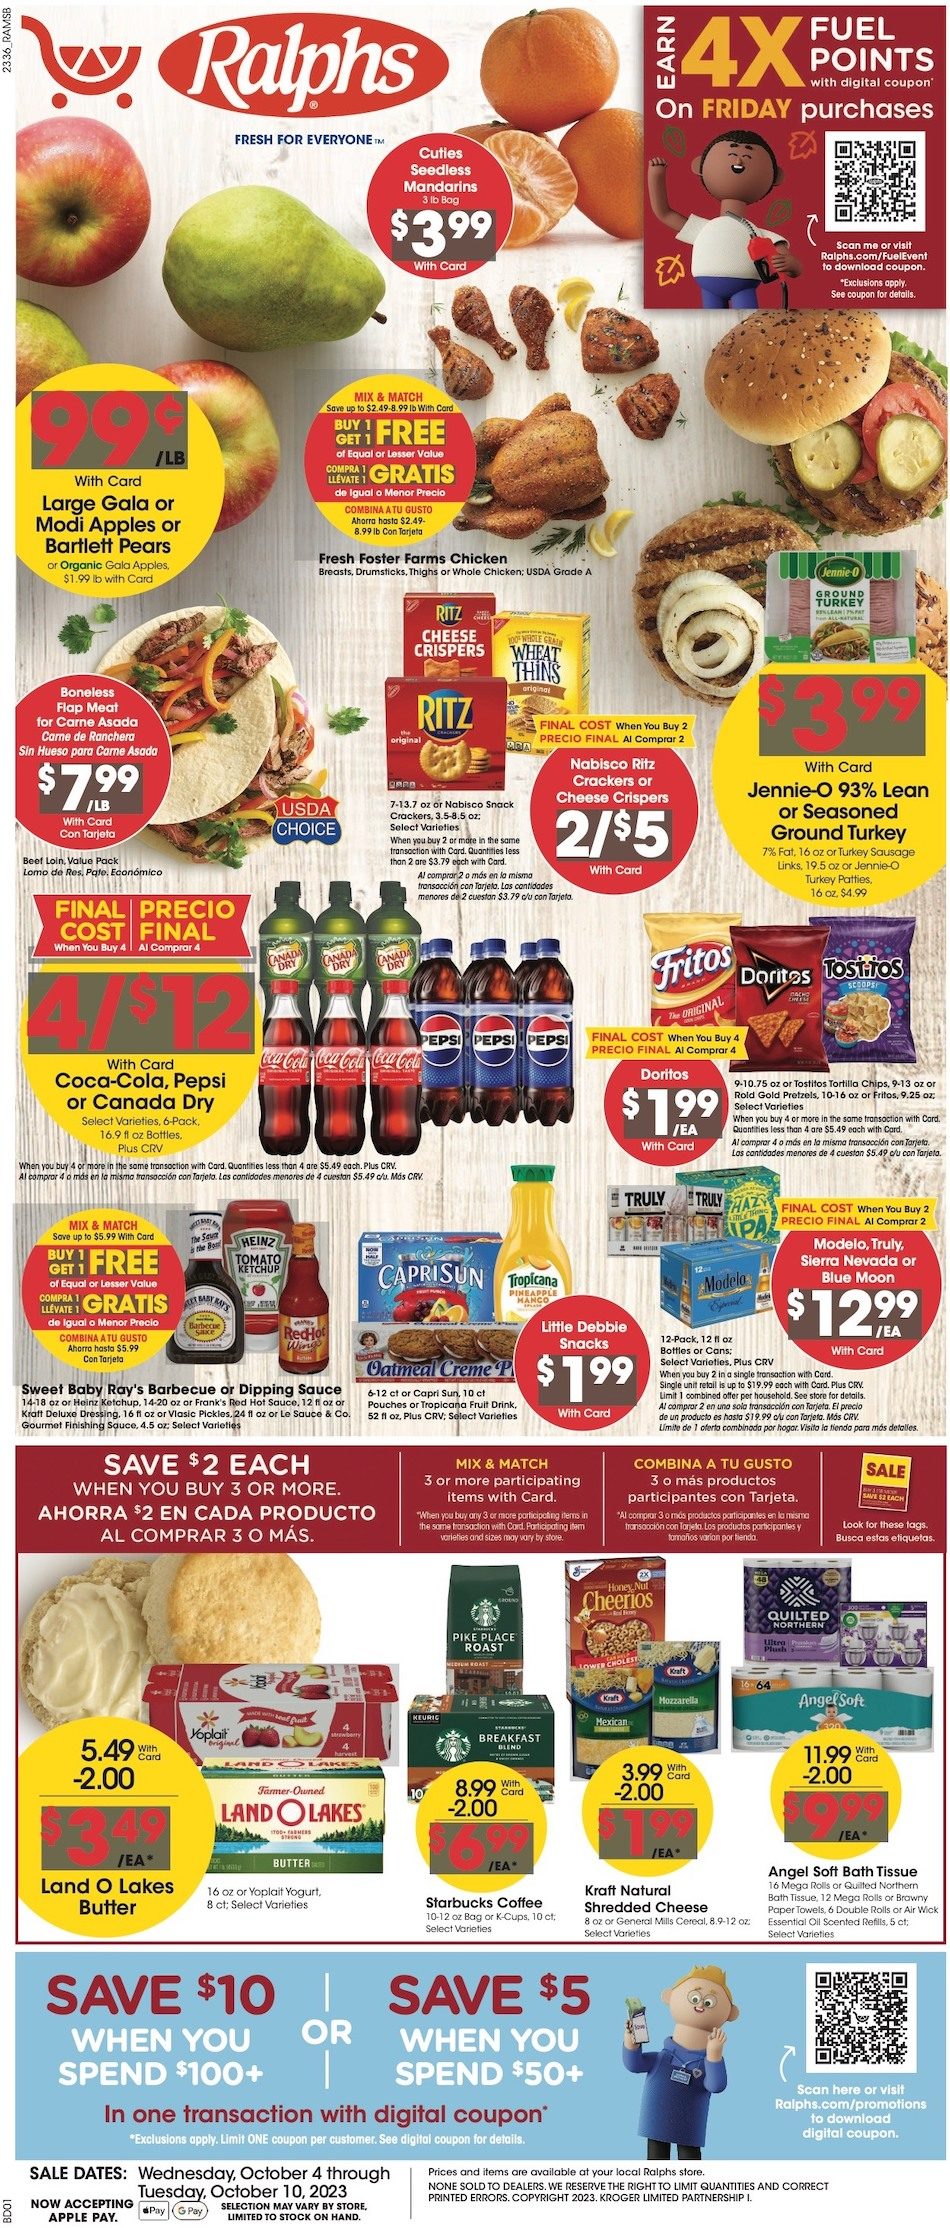 Ralphs Weekly Ad 4th – 10th October 2023 Page 1